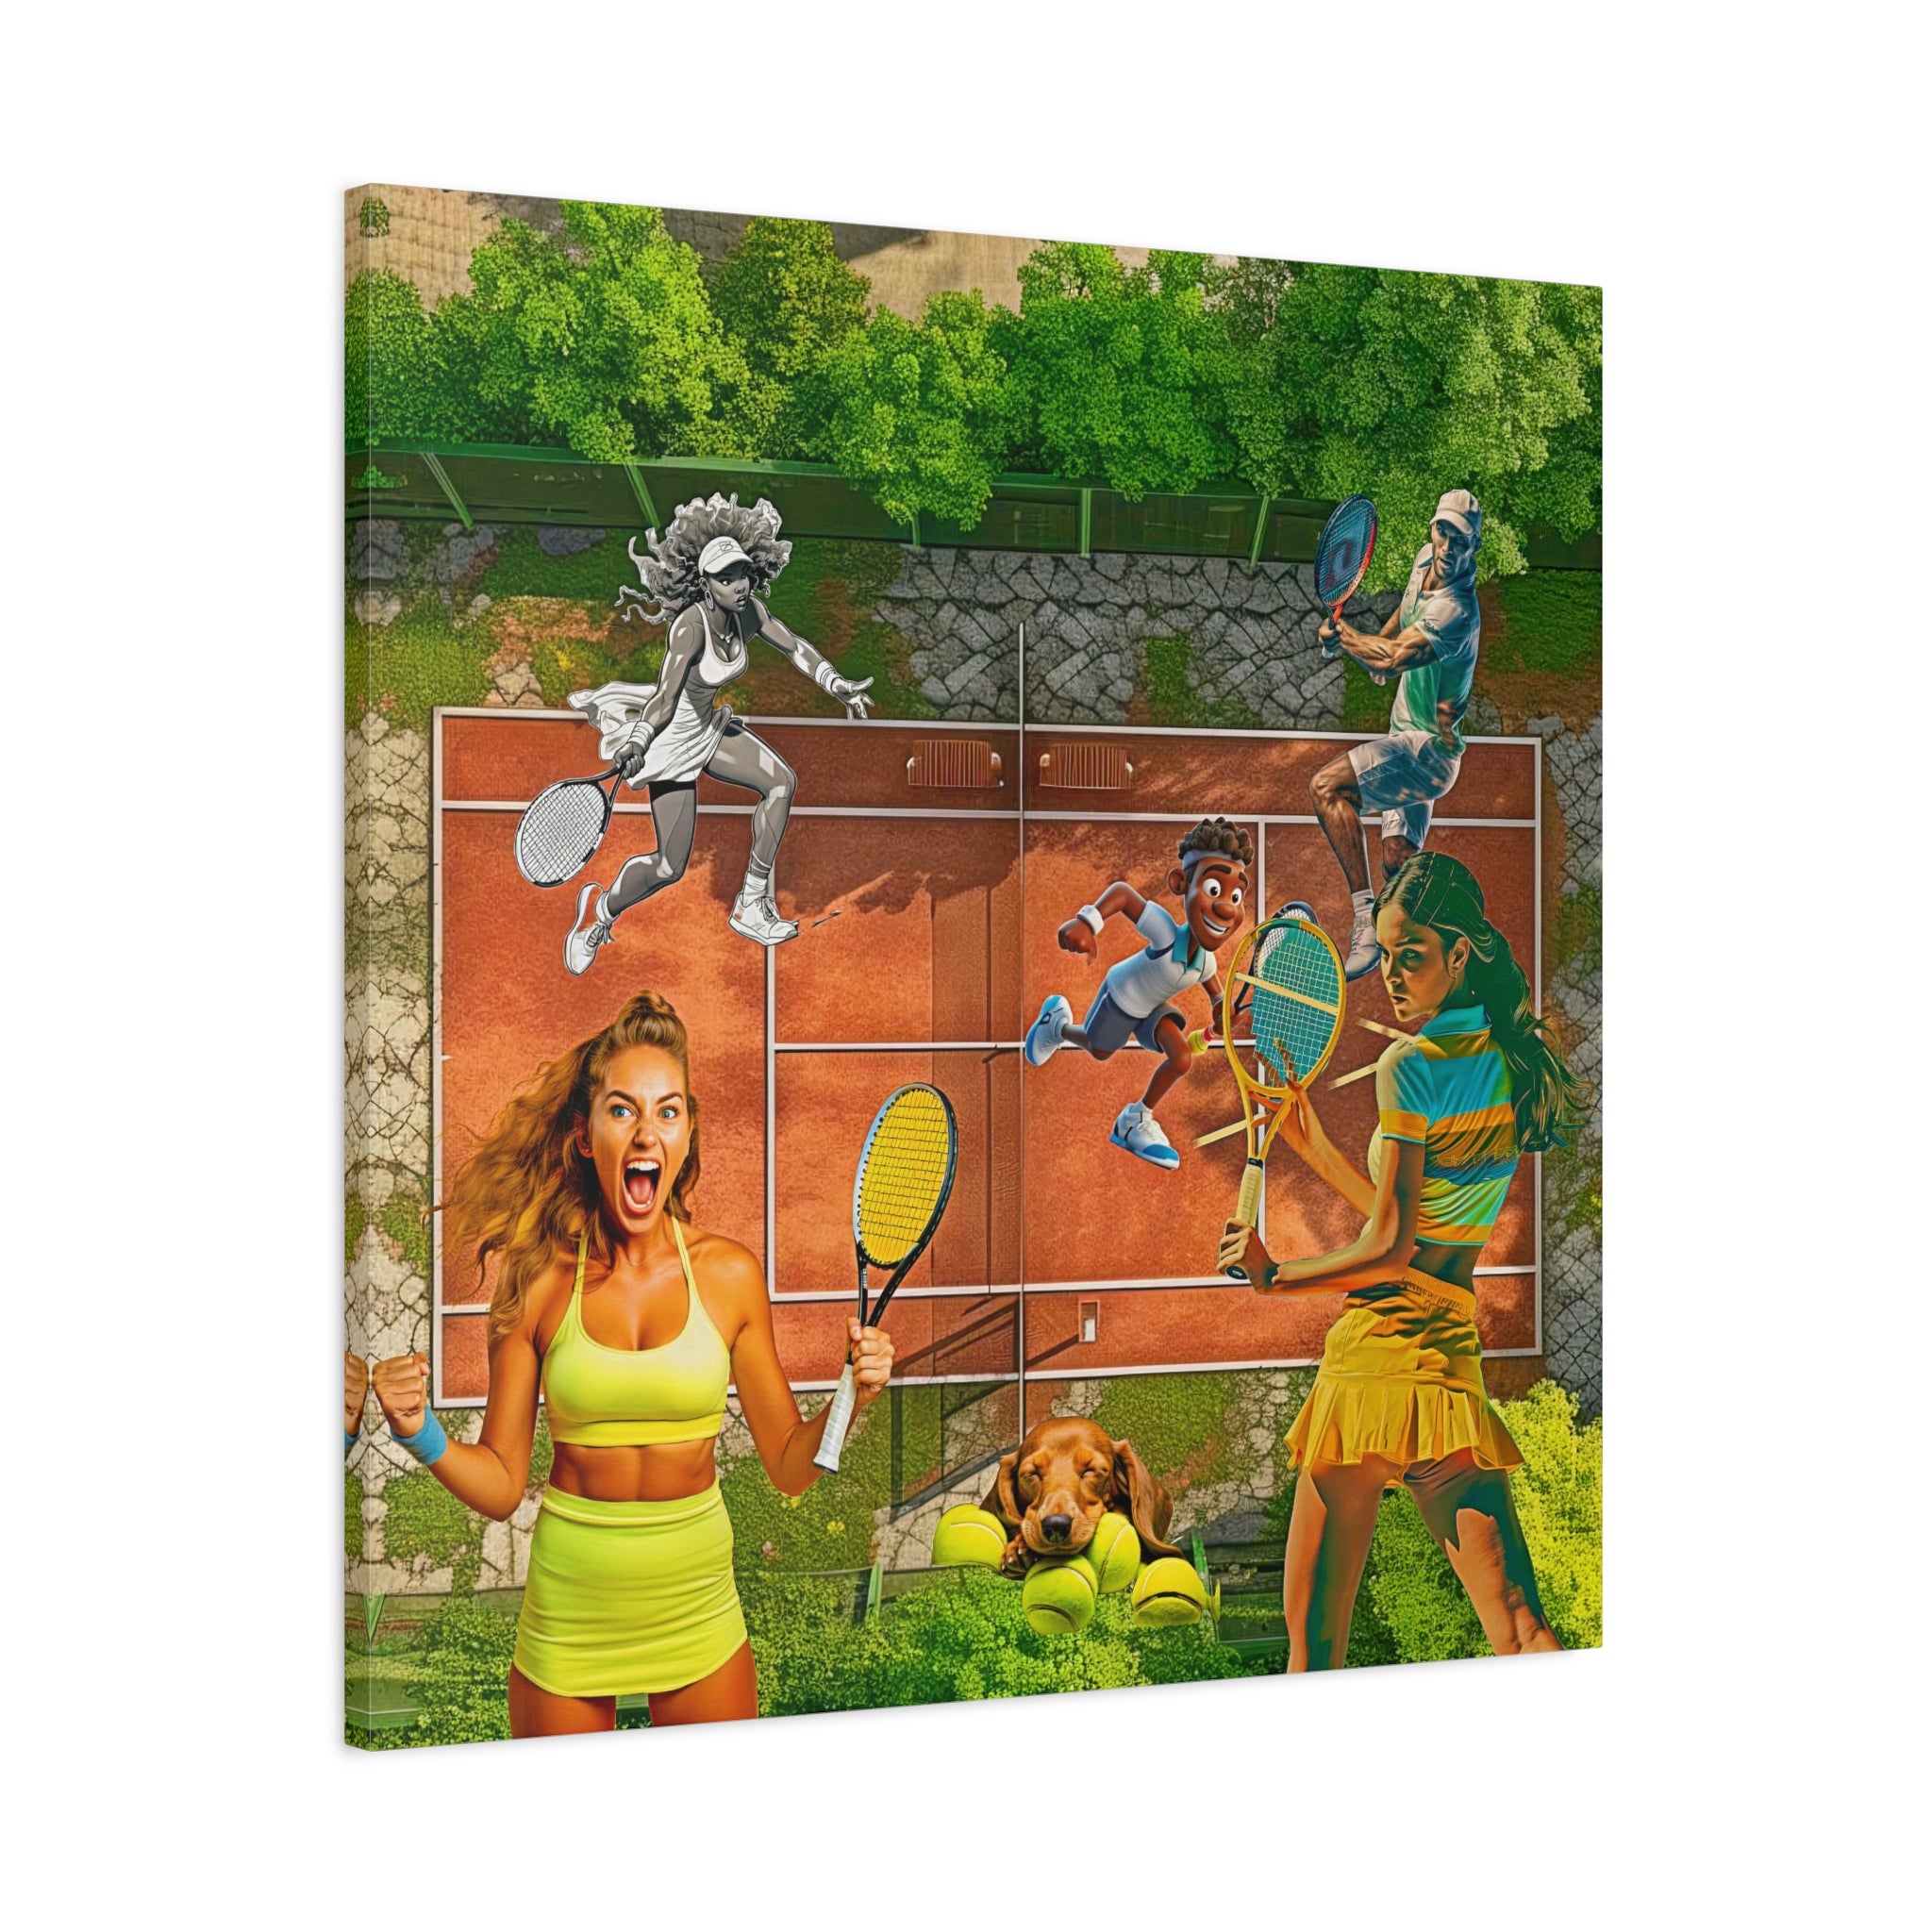 Wall Art TENNIS Sport Canvas Print Painting Original Giclee GW Love Nice Beauty Fun Design Fit Hot House Home Office Gift Ready to Hang Living